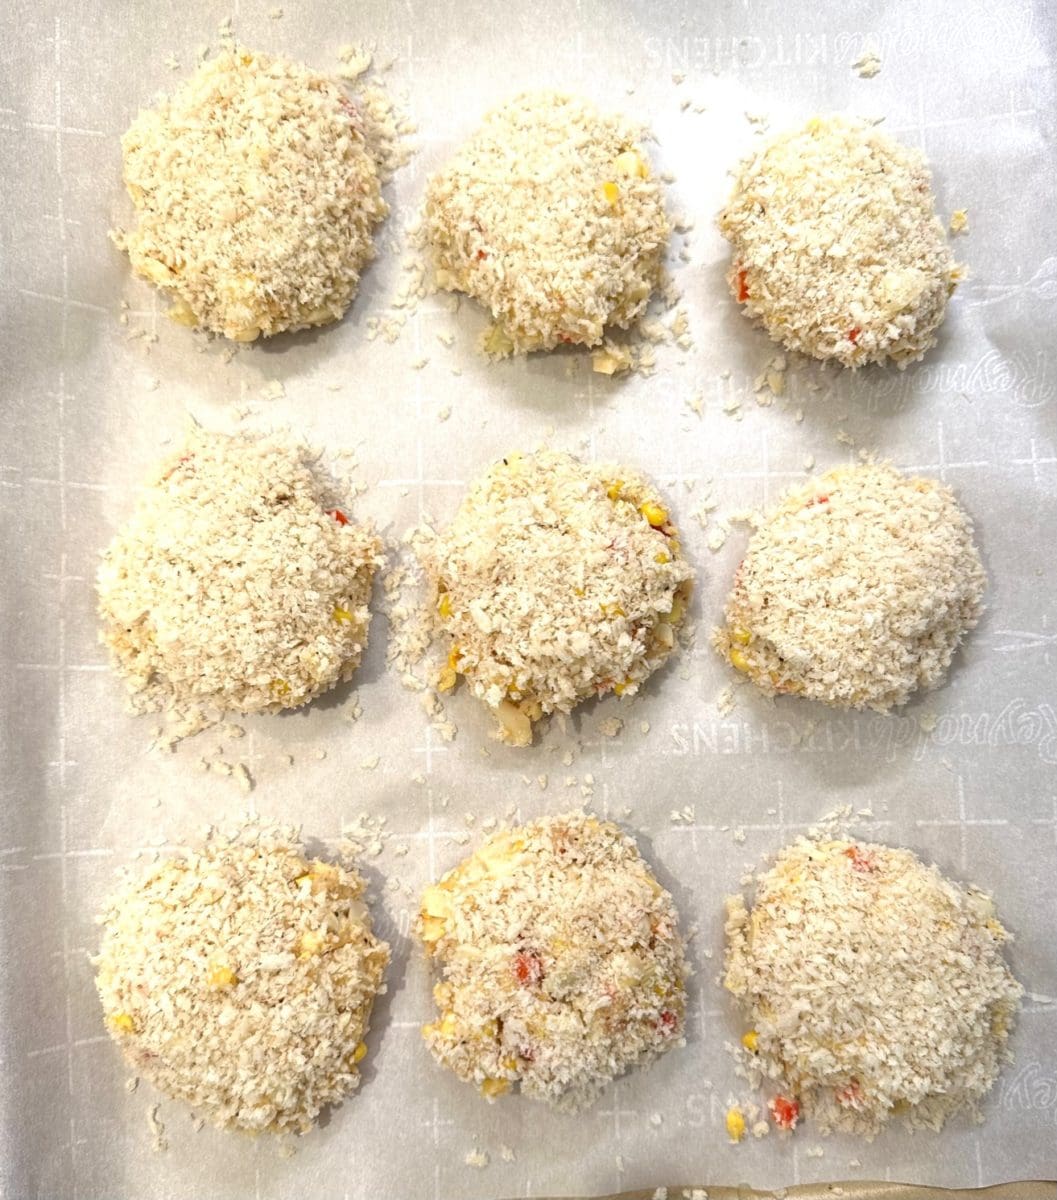 uncooked palm cakes